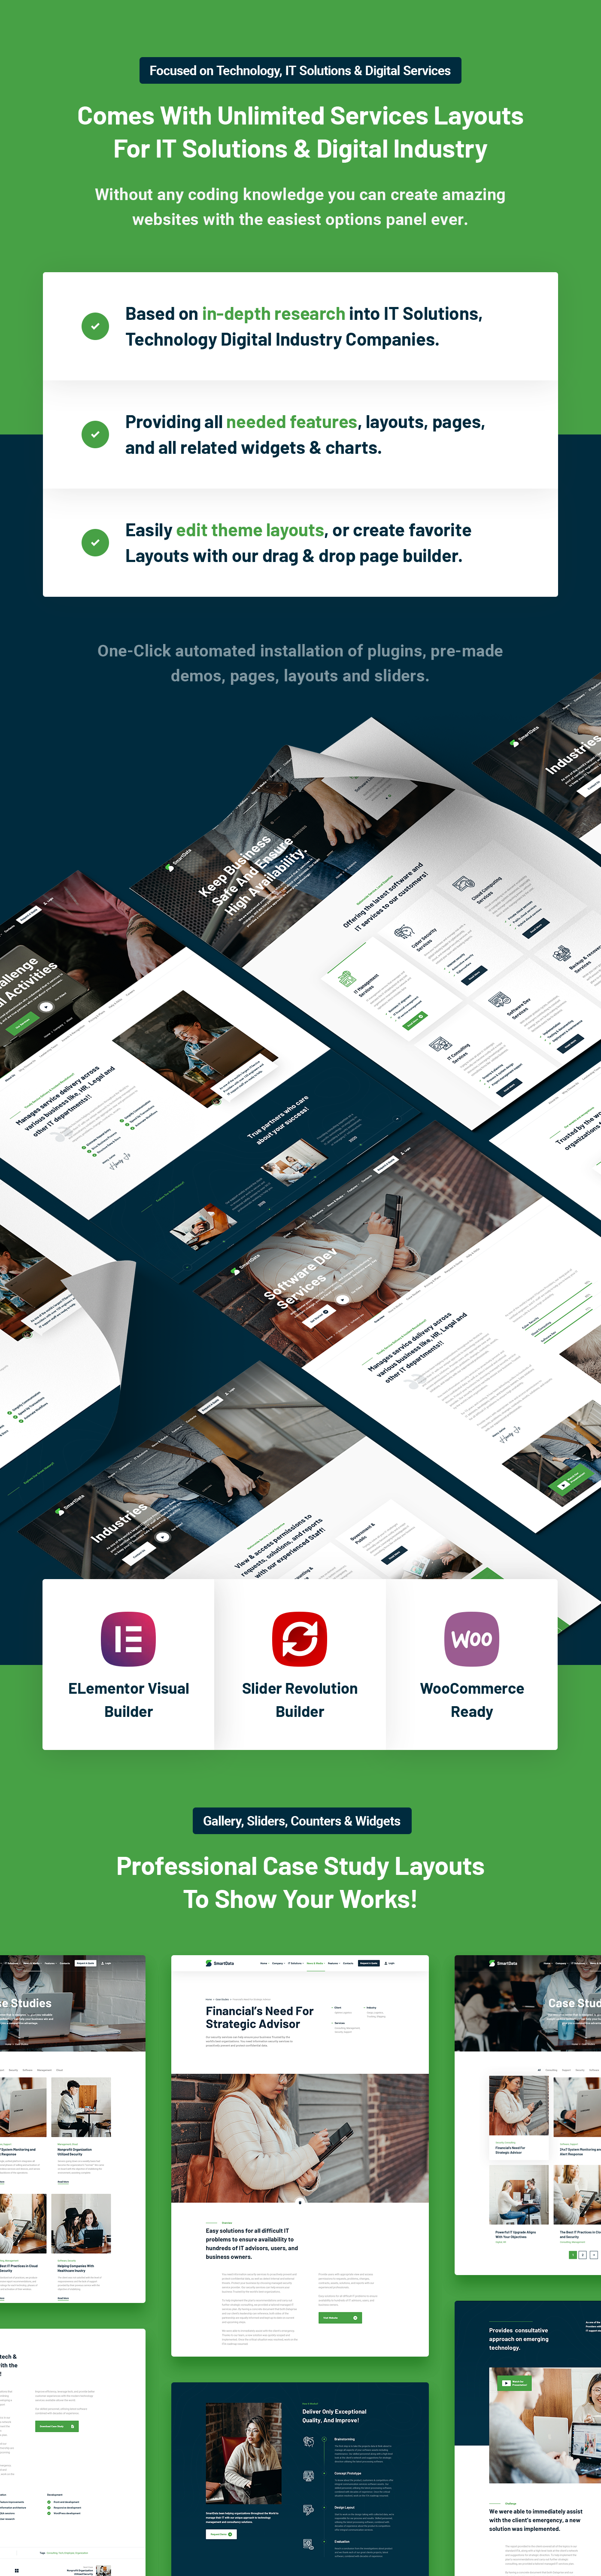 Smartdata - IT Solutions & Services WordPress Theme - 6